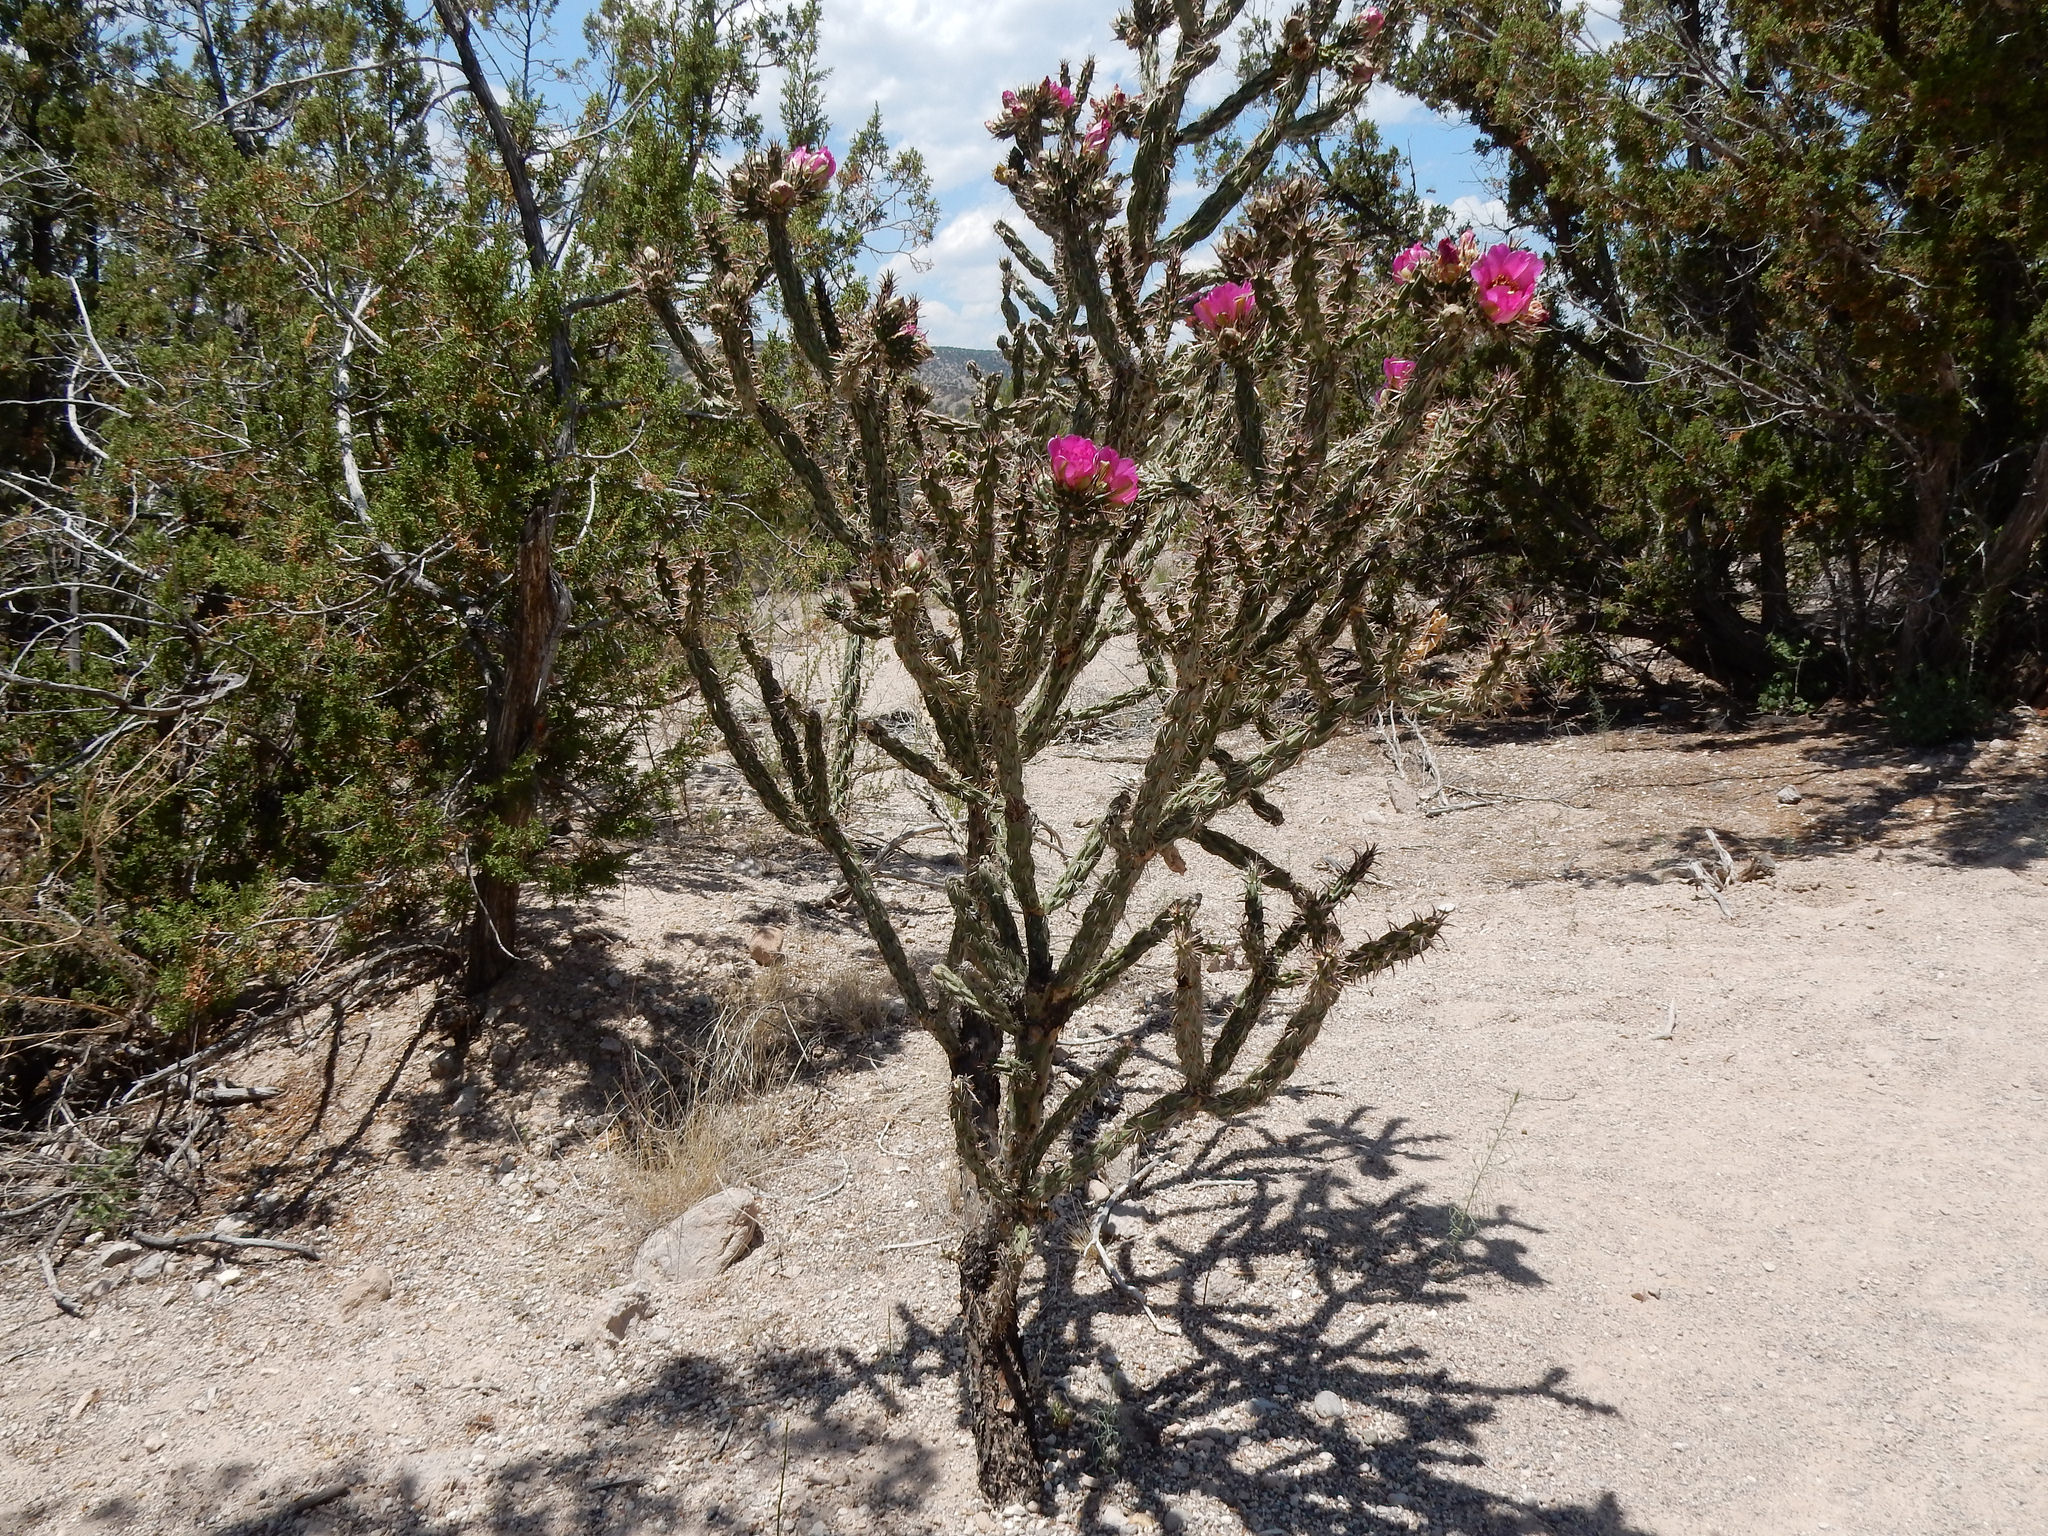 A tall and multi-branched cholla with pink flowers